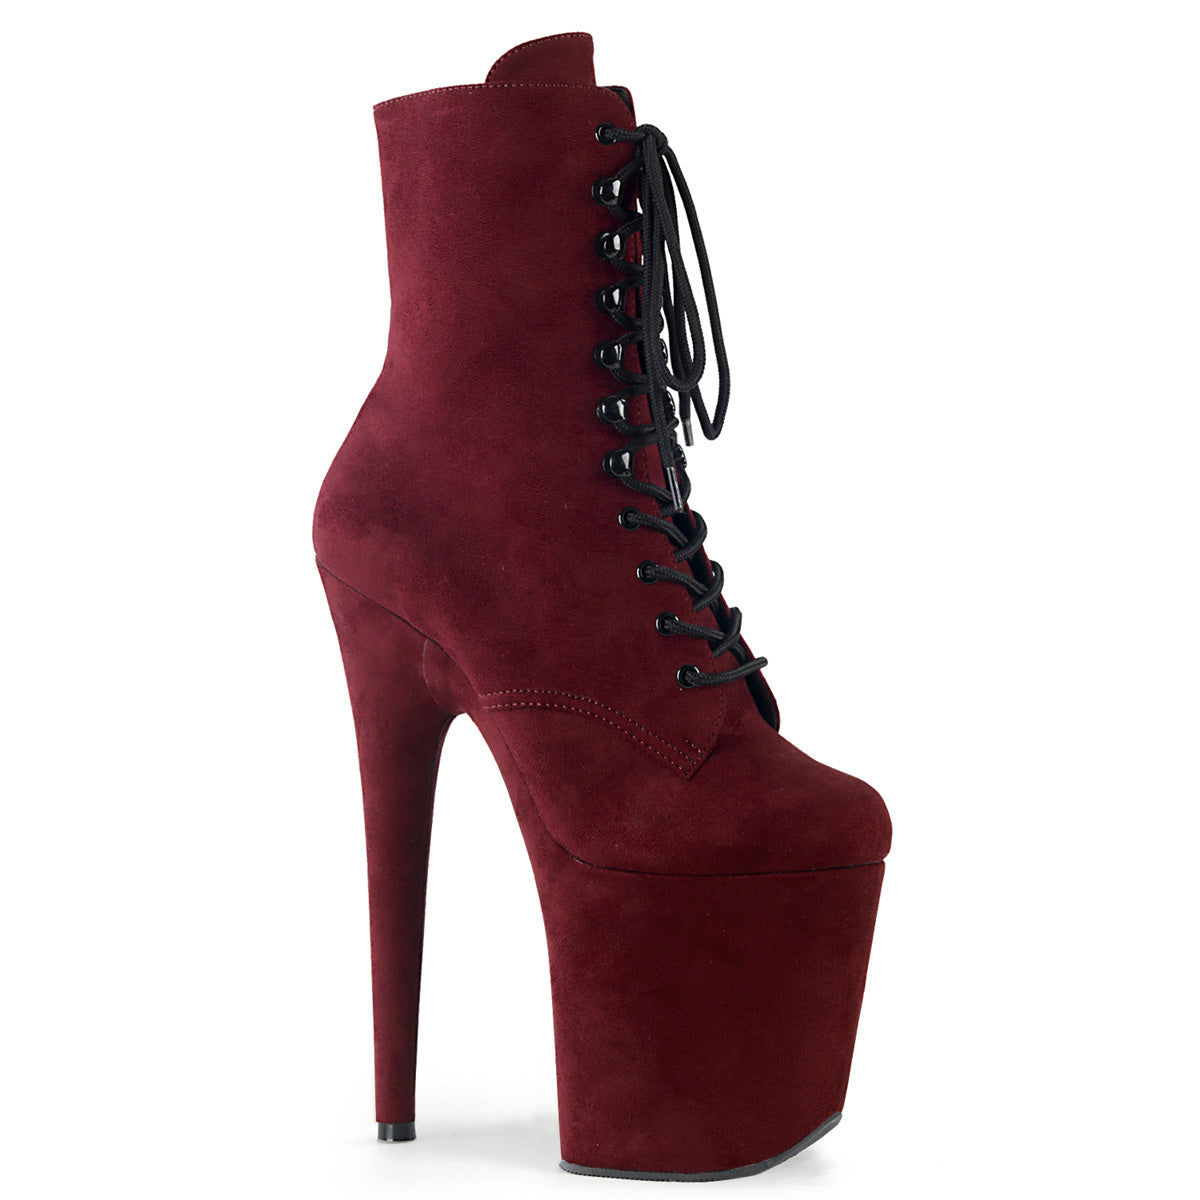 Pleaser Womens Ankle Boots FLAMINGO-1020FS Burgundy Faux Suede/Burgundy Faux Suede